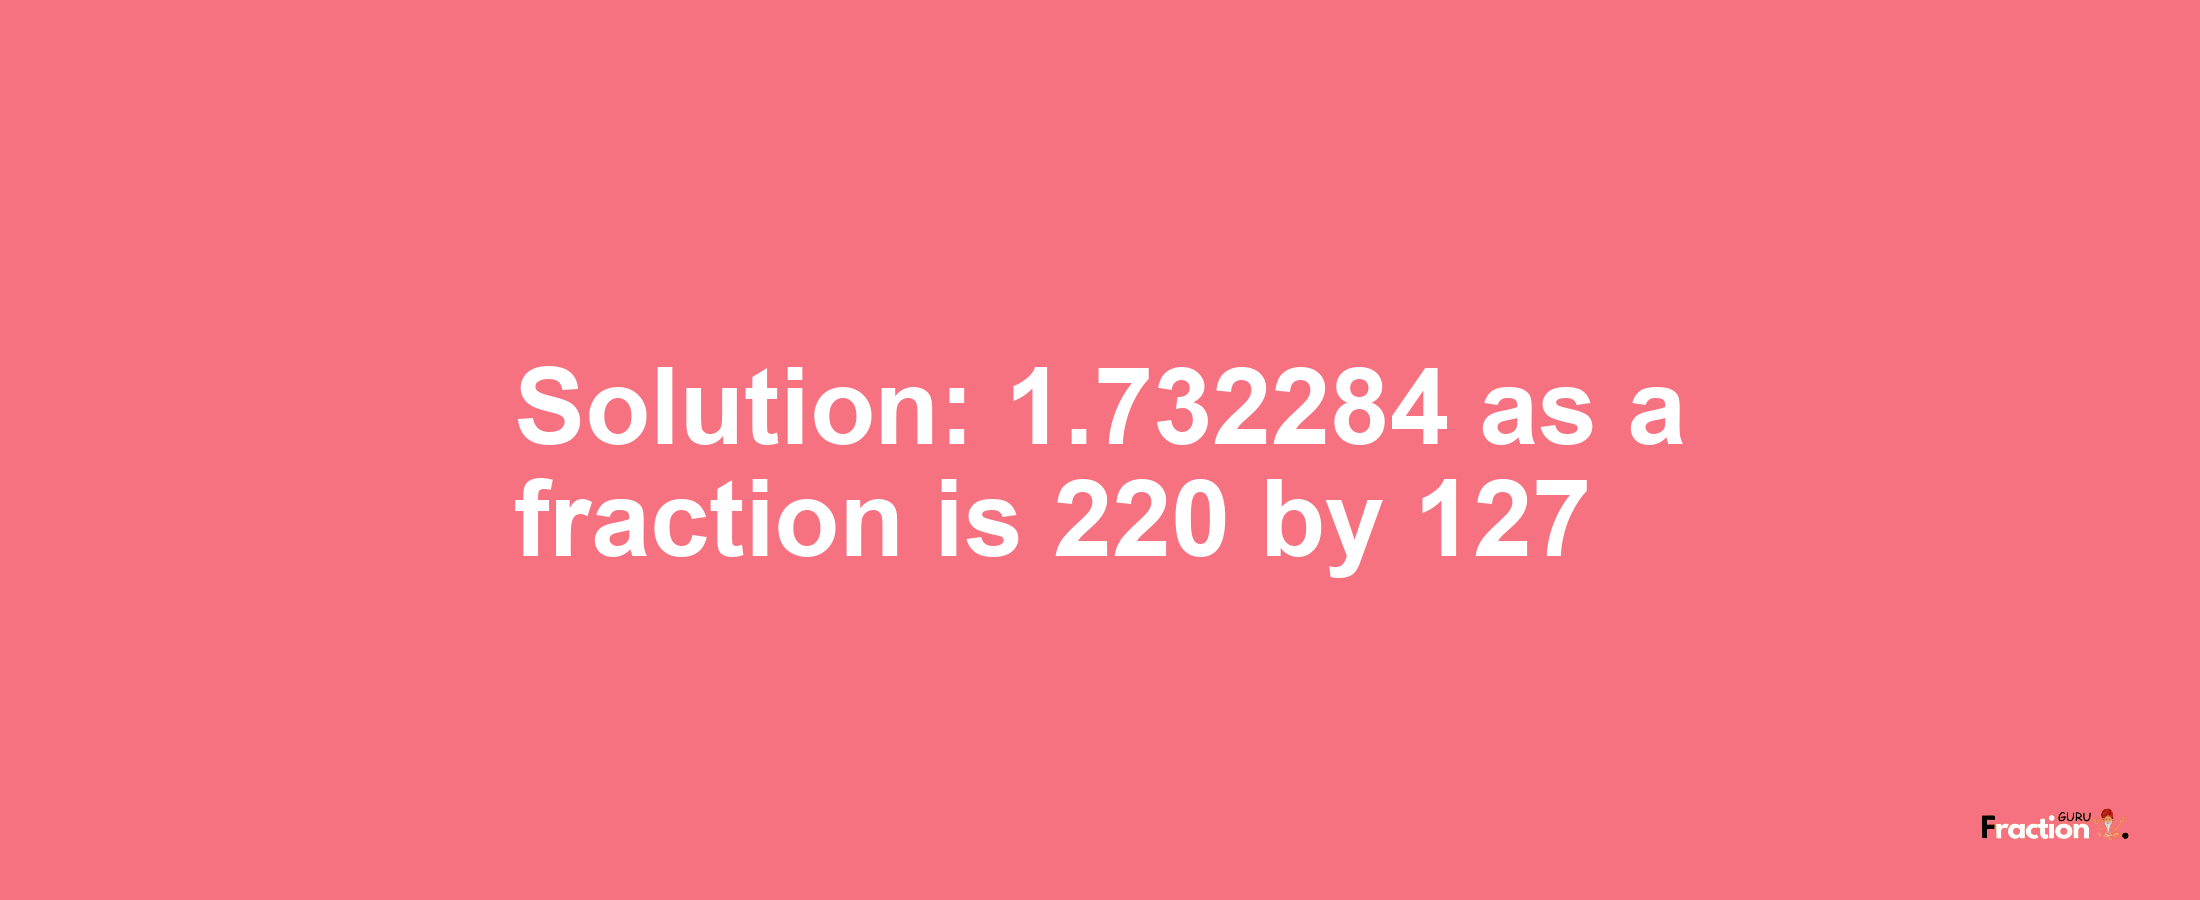 Solution:1.732284 as a fraction is 220/127